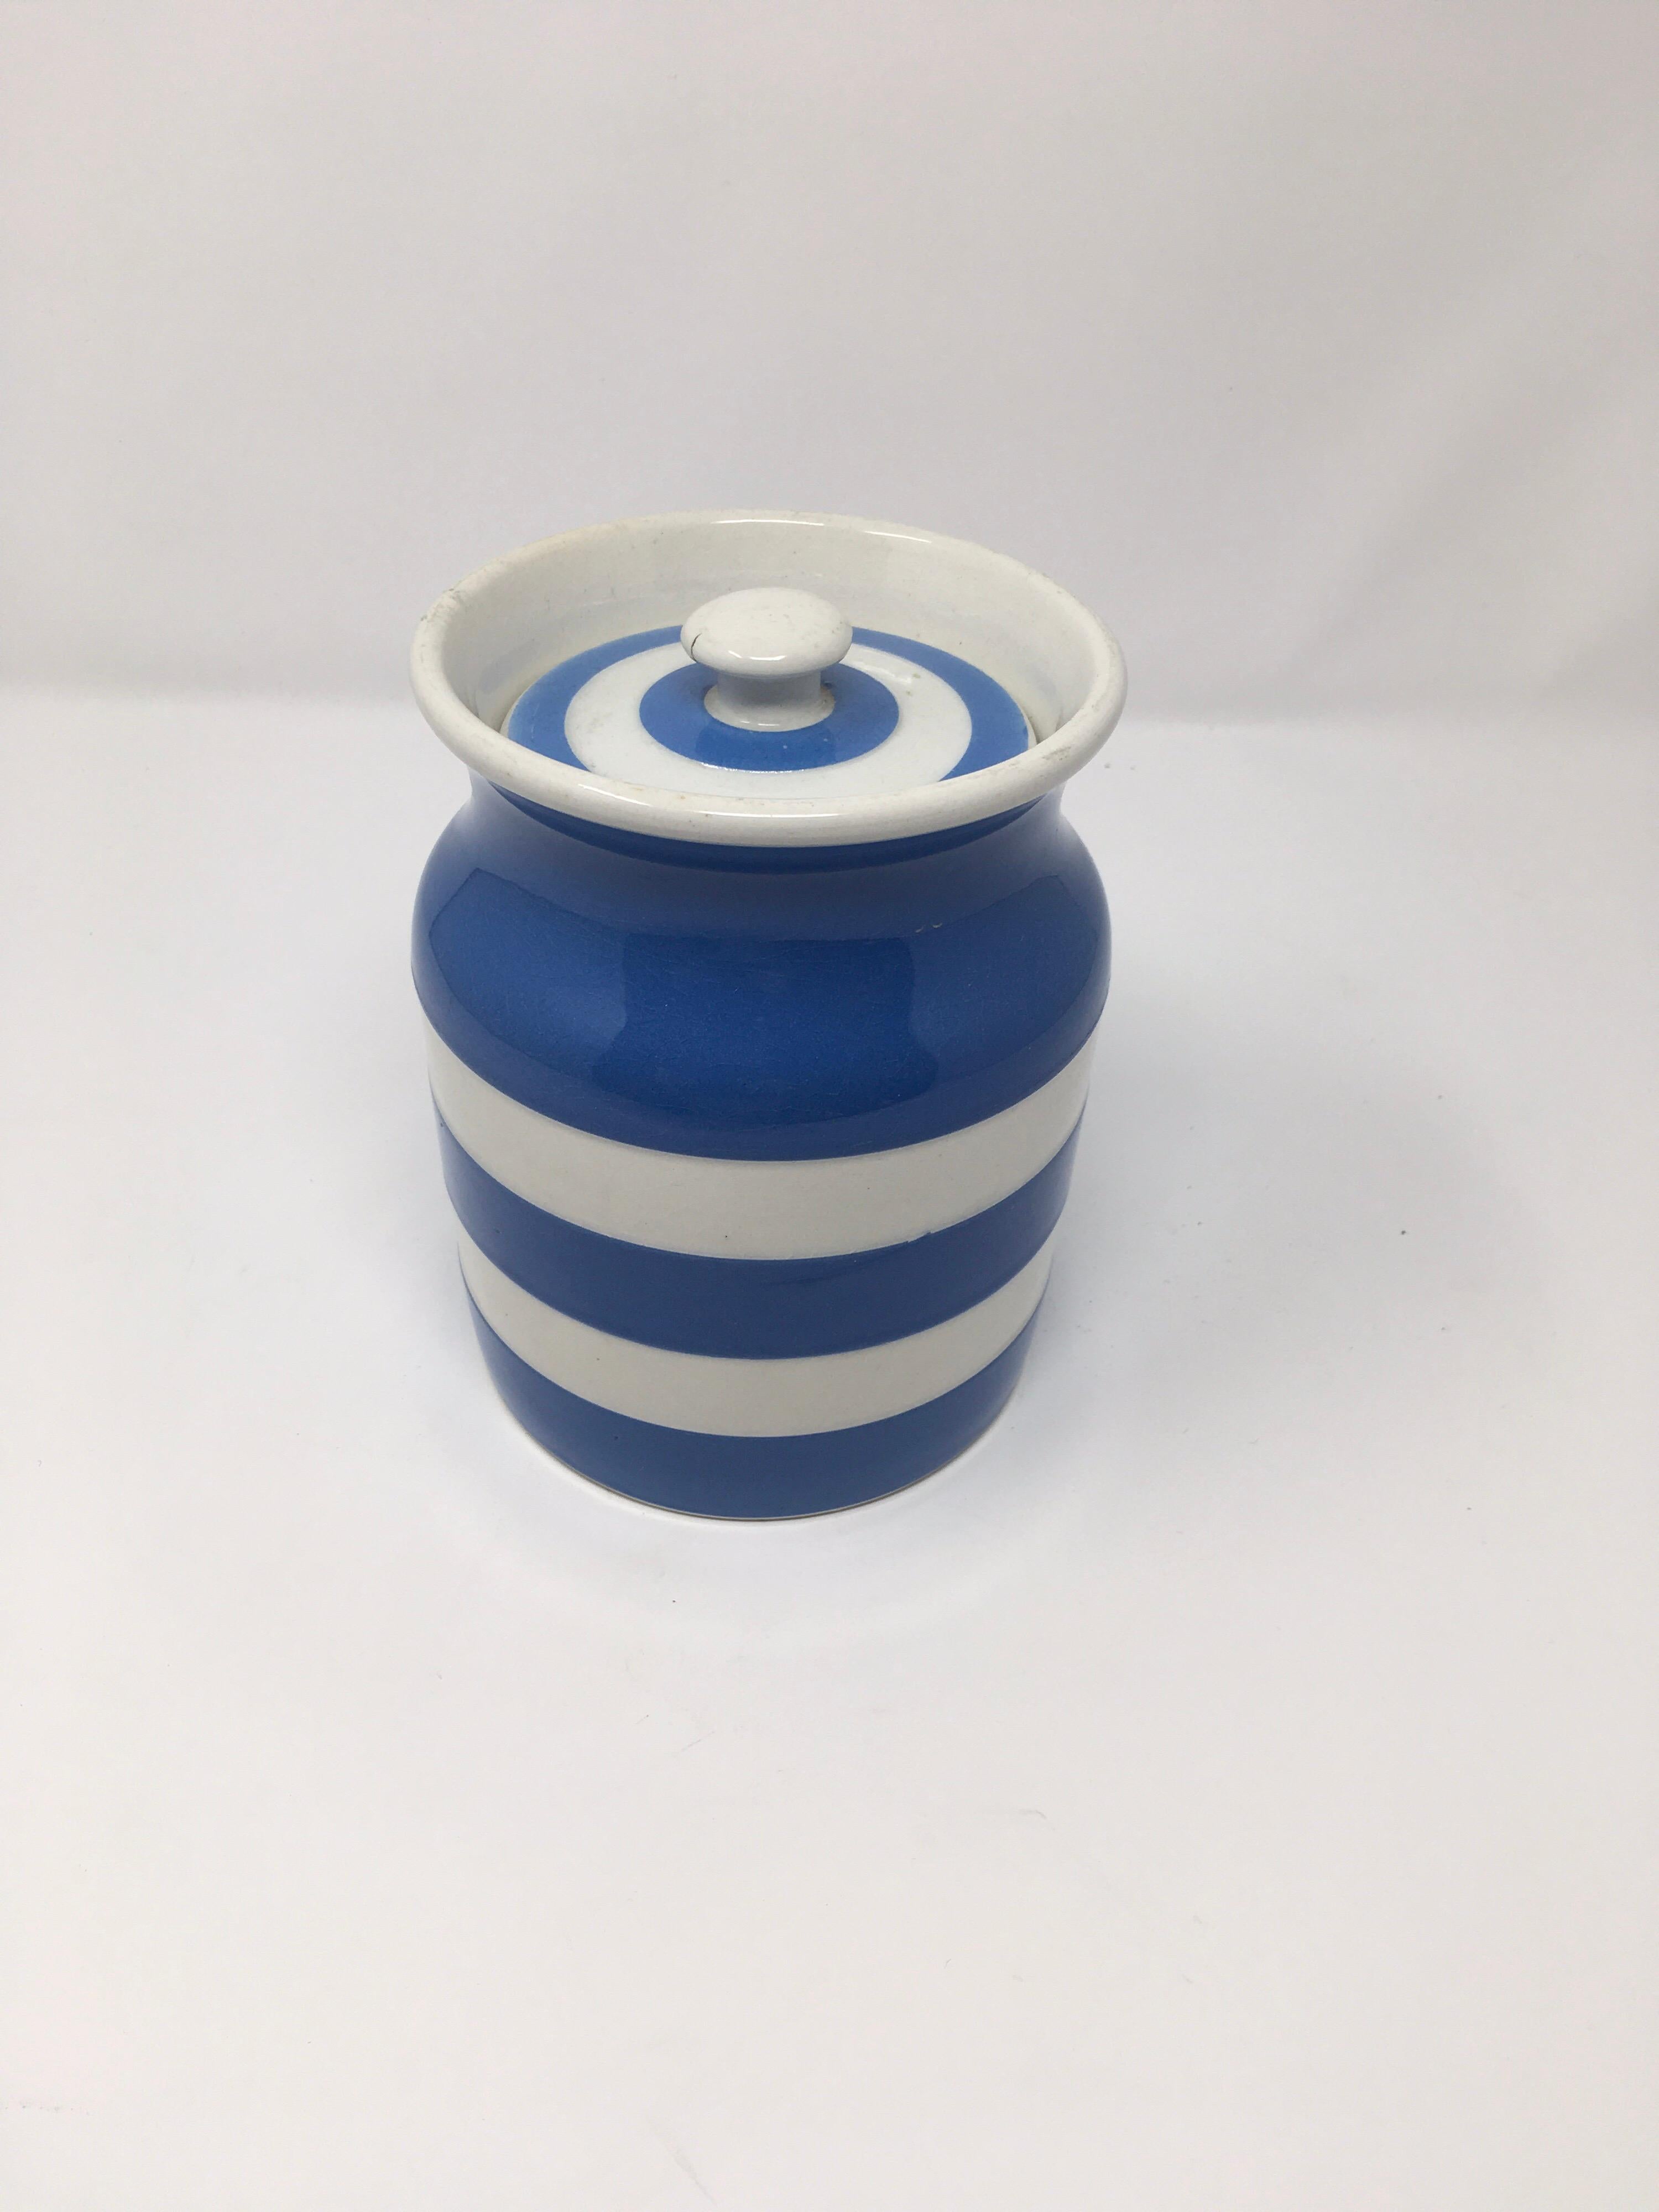 This Cornish kitchen ware sugar storage Jar by T.G. Green will look fabulous displayed on your counter top or in a kitchen cabinet. Using lathe-turning technique to create the stripes, this style of pottery remains one of the companies most popular